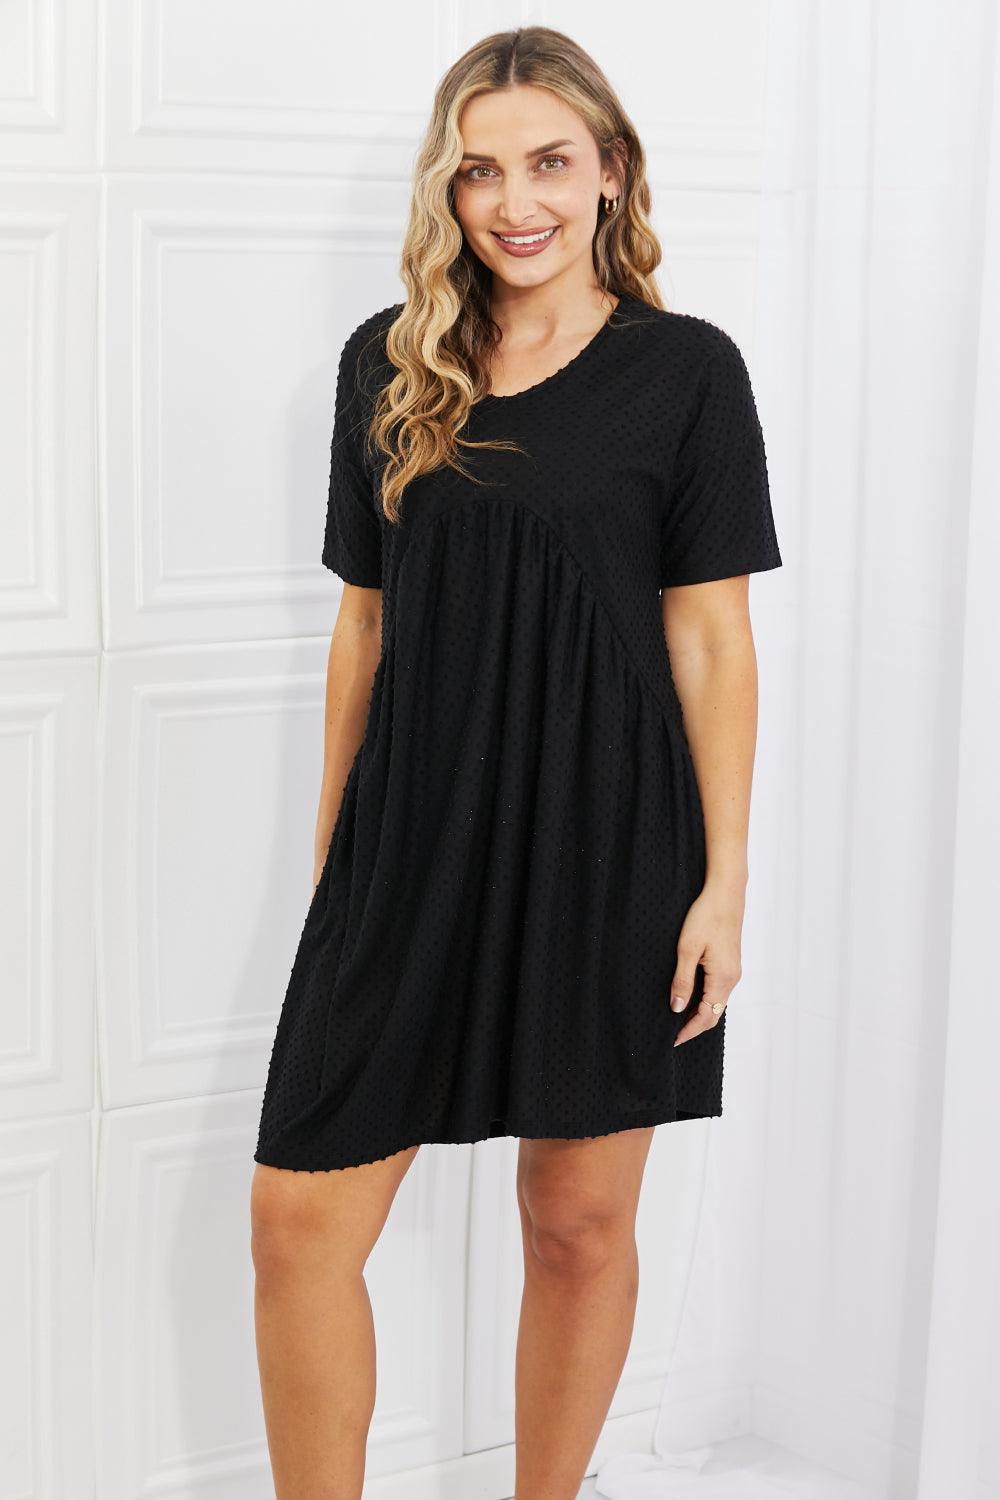 BOMBOM Another Day Swiss Dot Casual Dress in Black - God's Girl Gifts And Apparel